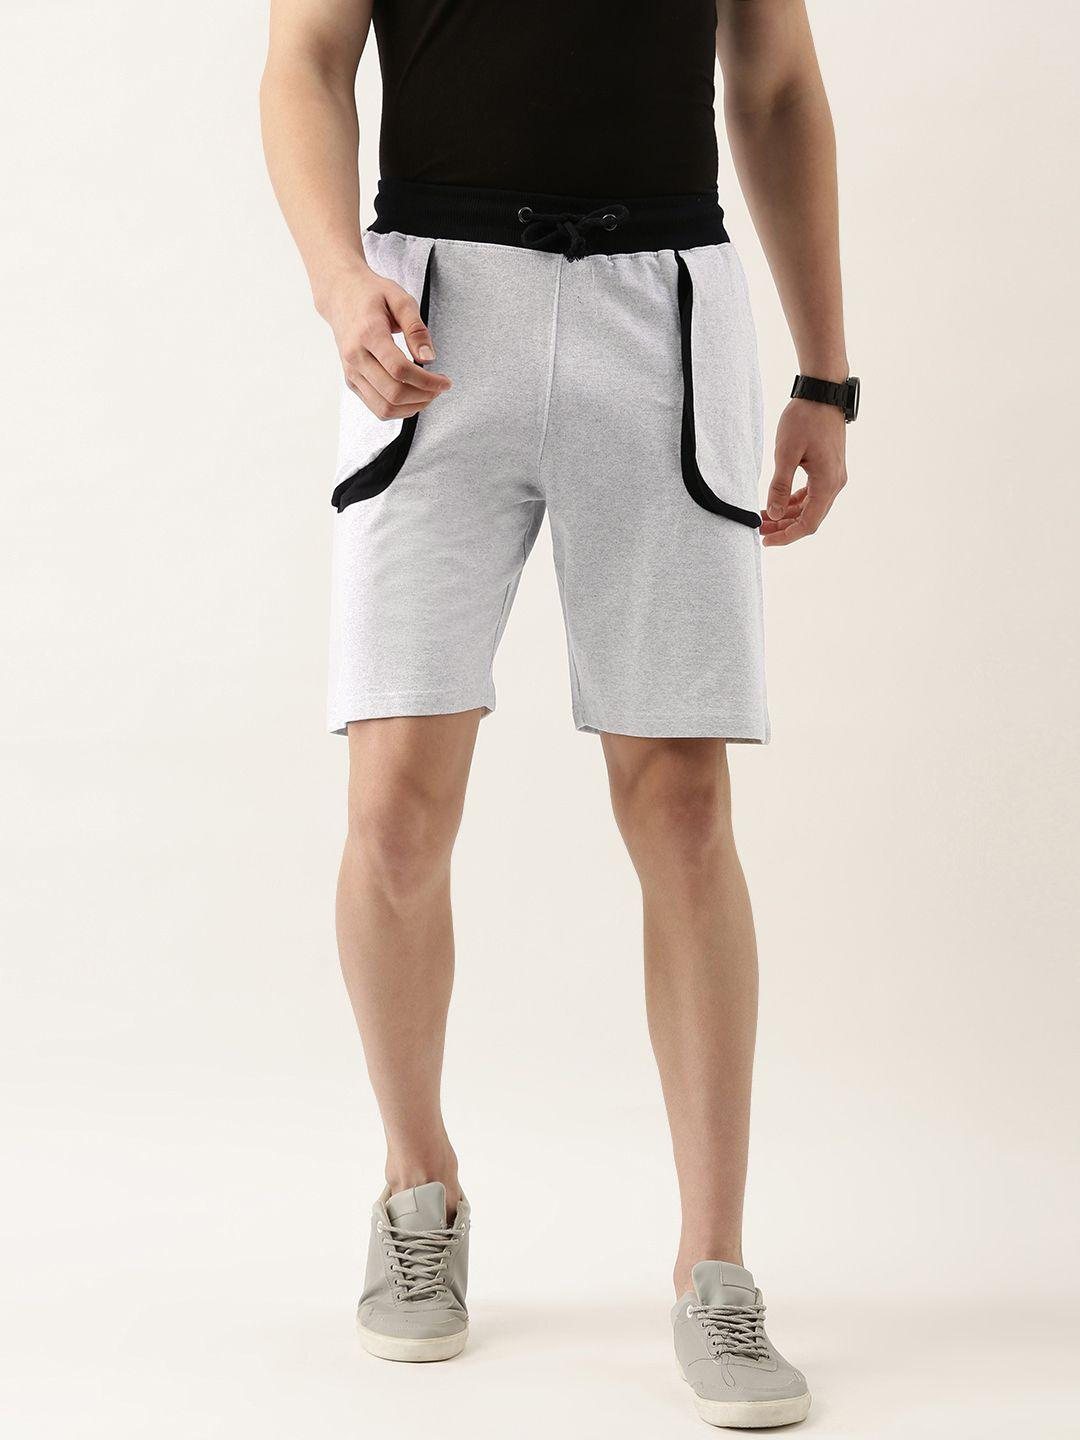 arise-men-off-white-solid-shorts